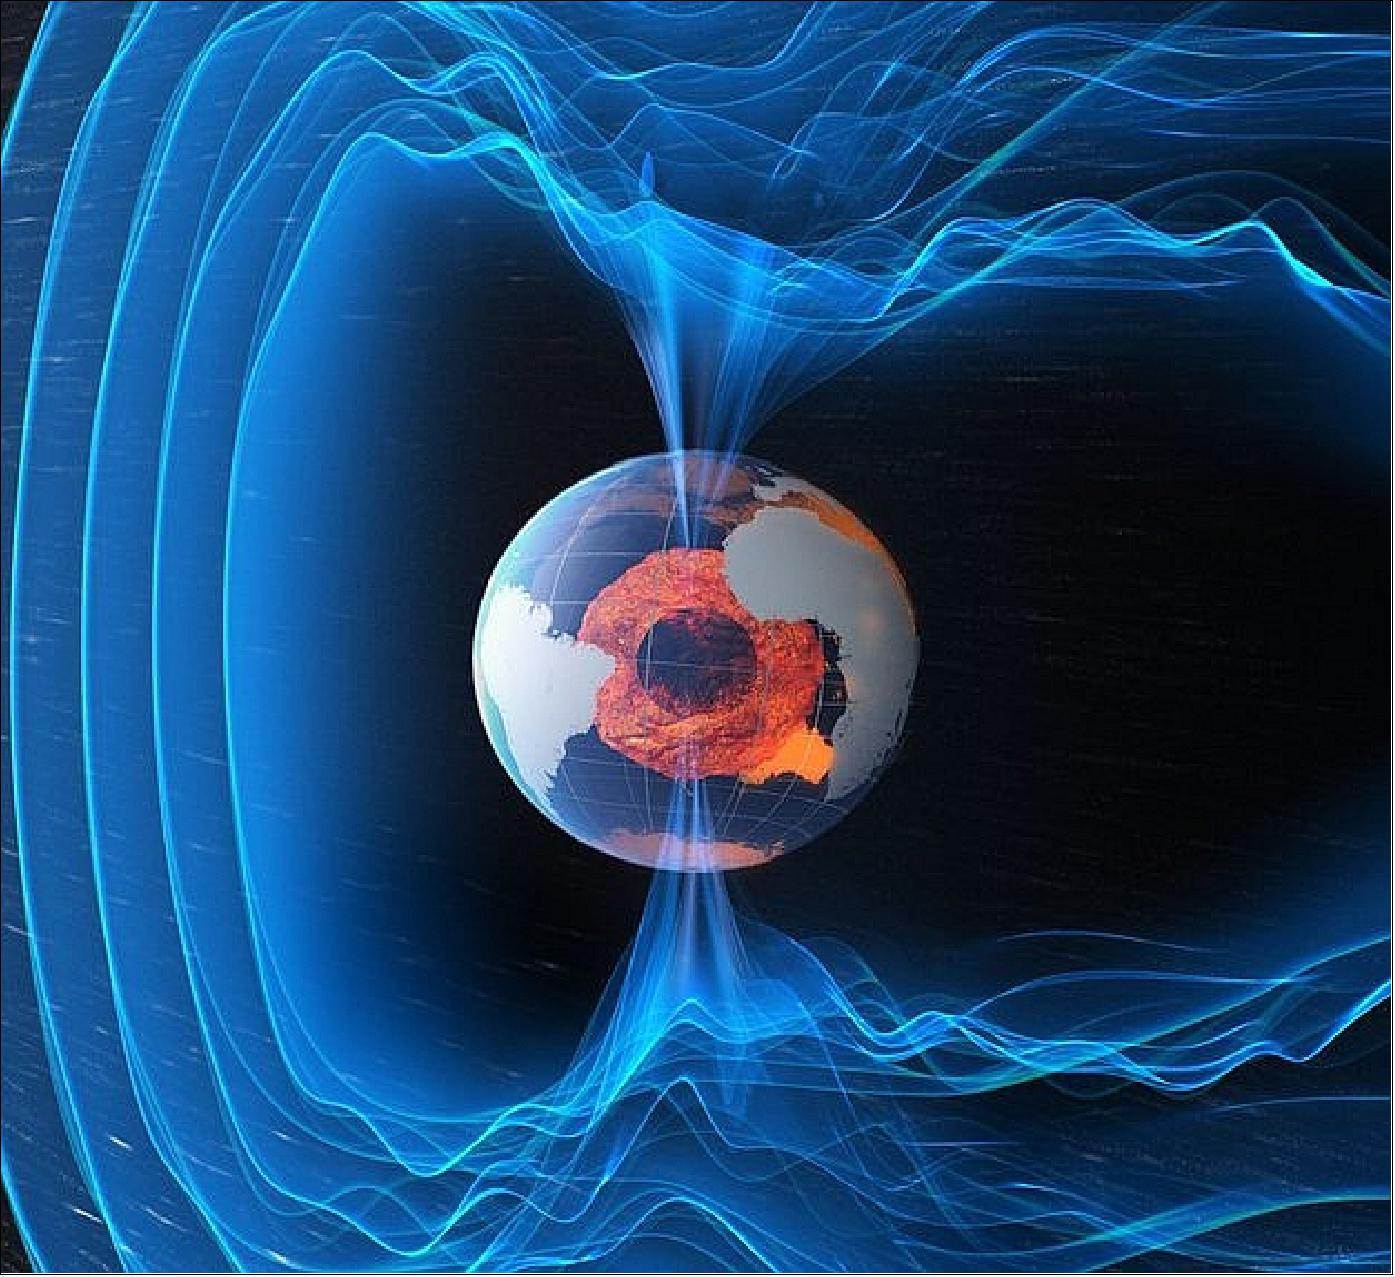 Figure 6: Schematic view of Earth's magnetic field (image credit: ESA/ATG Medialab) 30)